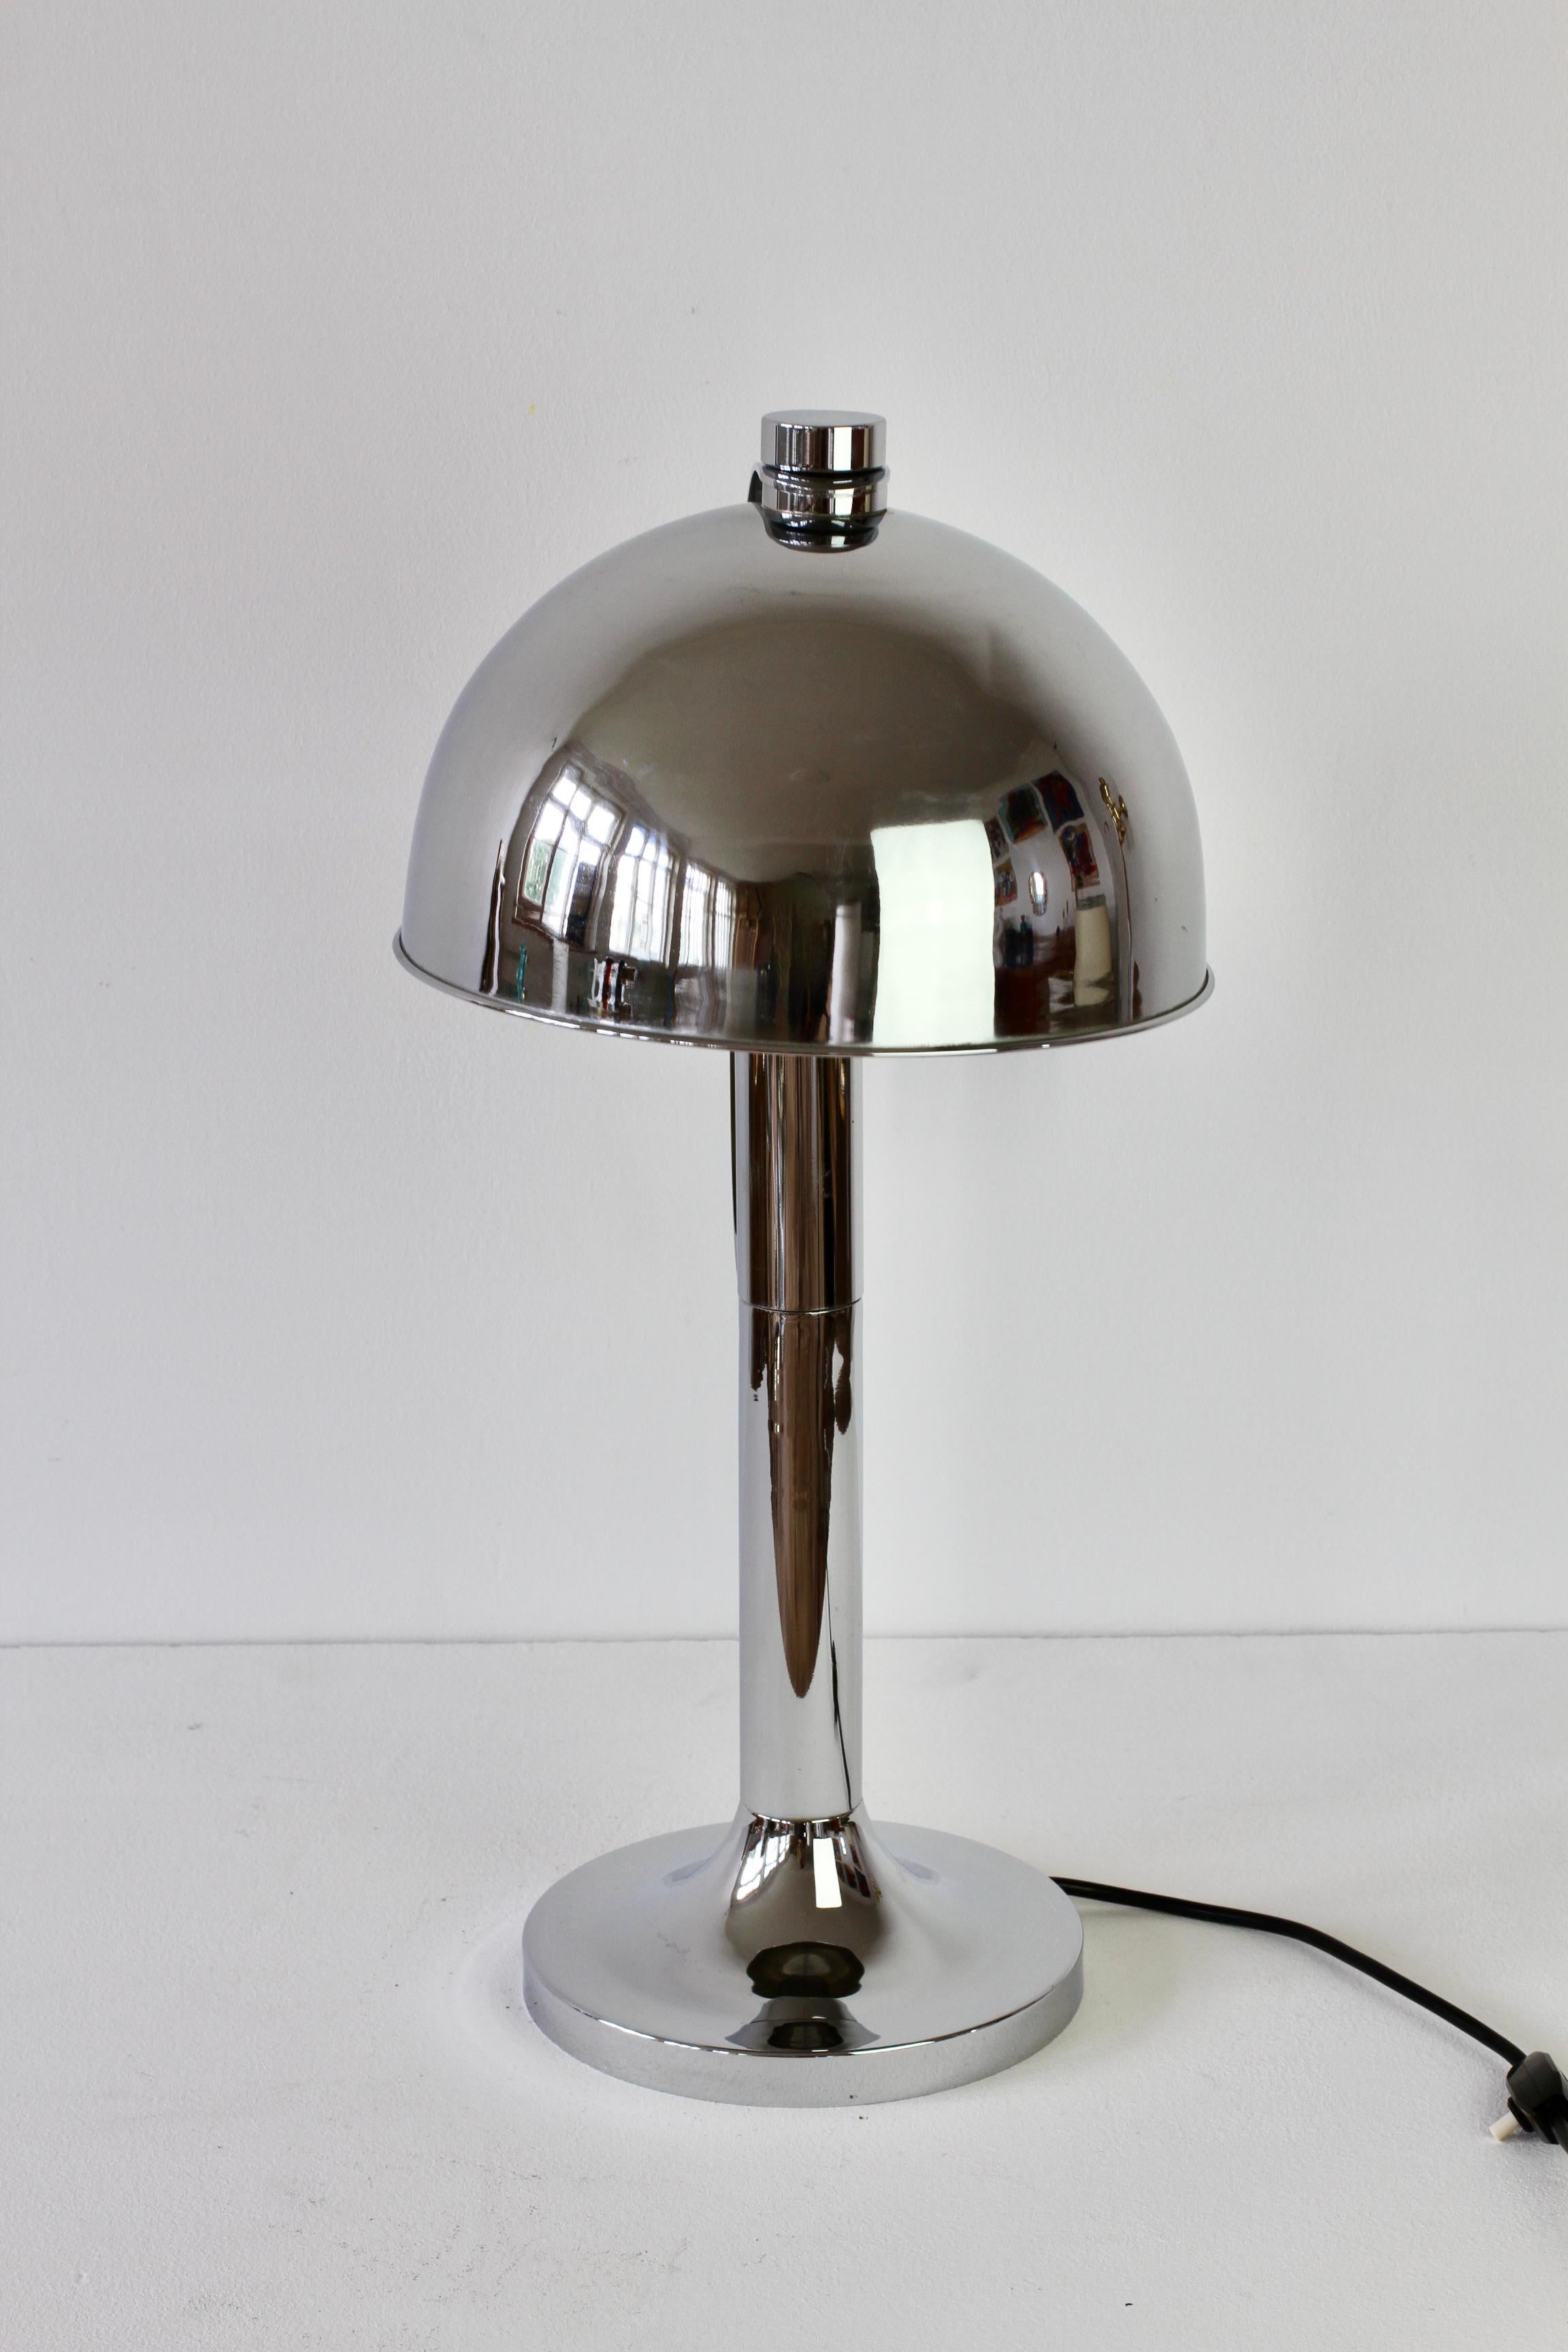 Rare Mid-Century Modern vintage German made table lamp or desk light by Florian Schulz circa 1970s. Featuring polished chrome plated brass hardware (now with age related patina) and an adjustable round shade making this the perfect modernist style